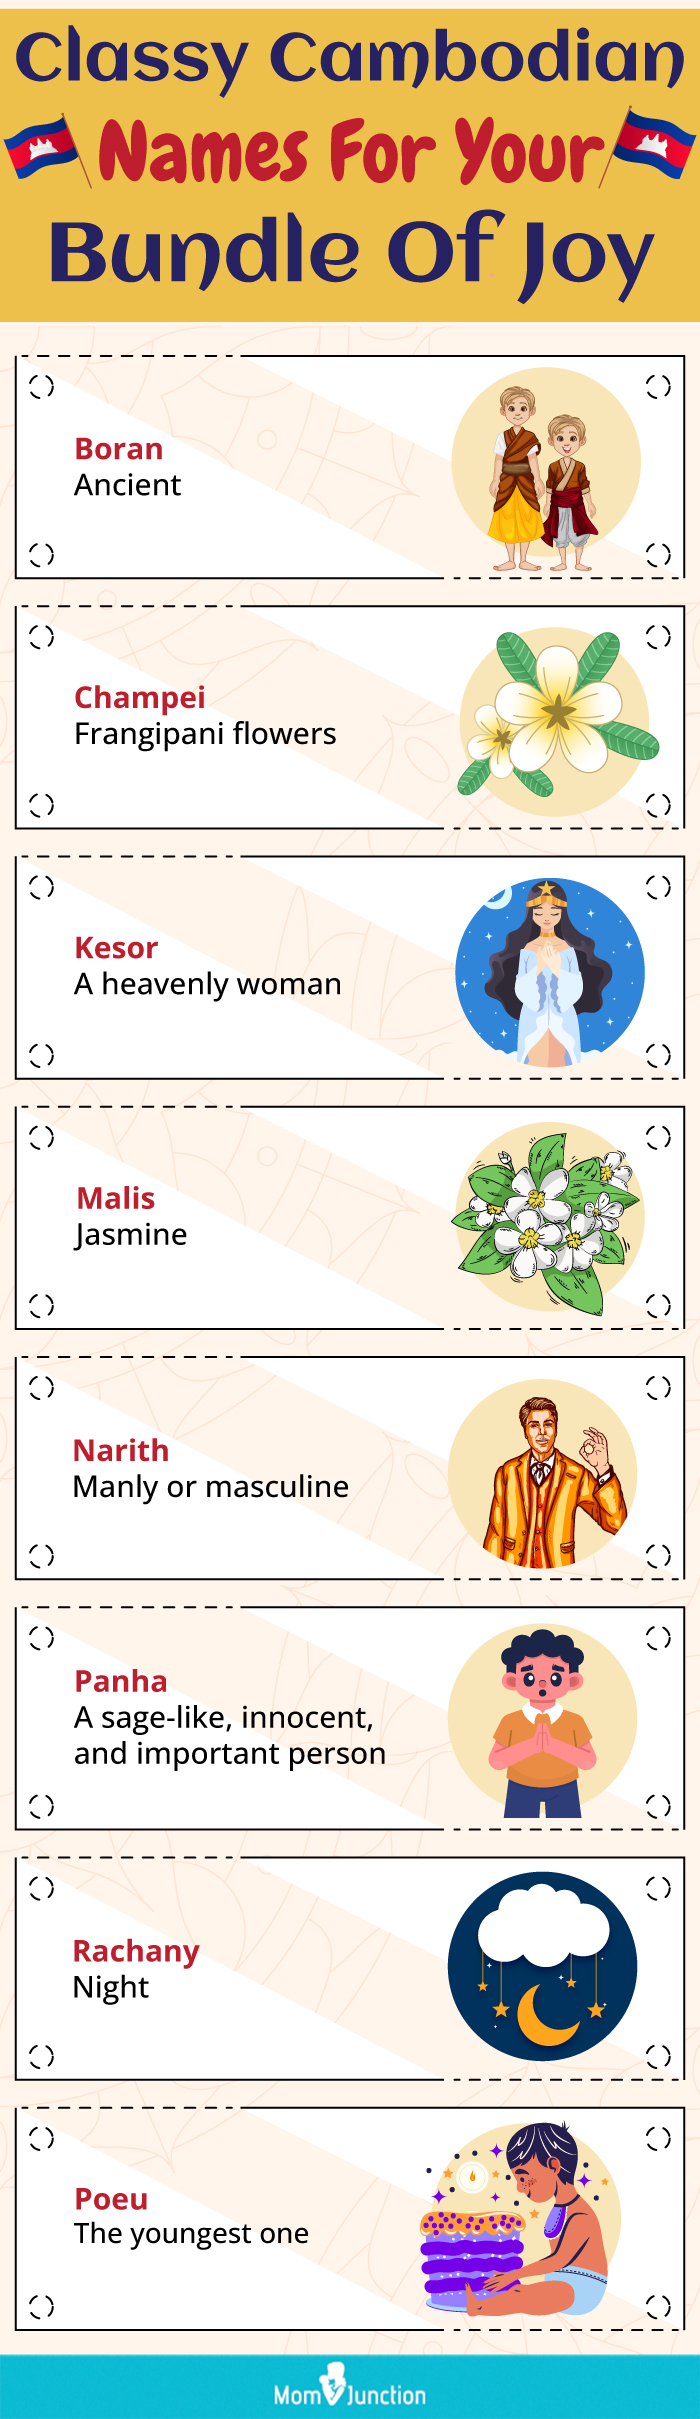 classy cambodian names for your bundle of joy (infographic)